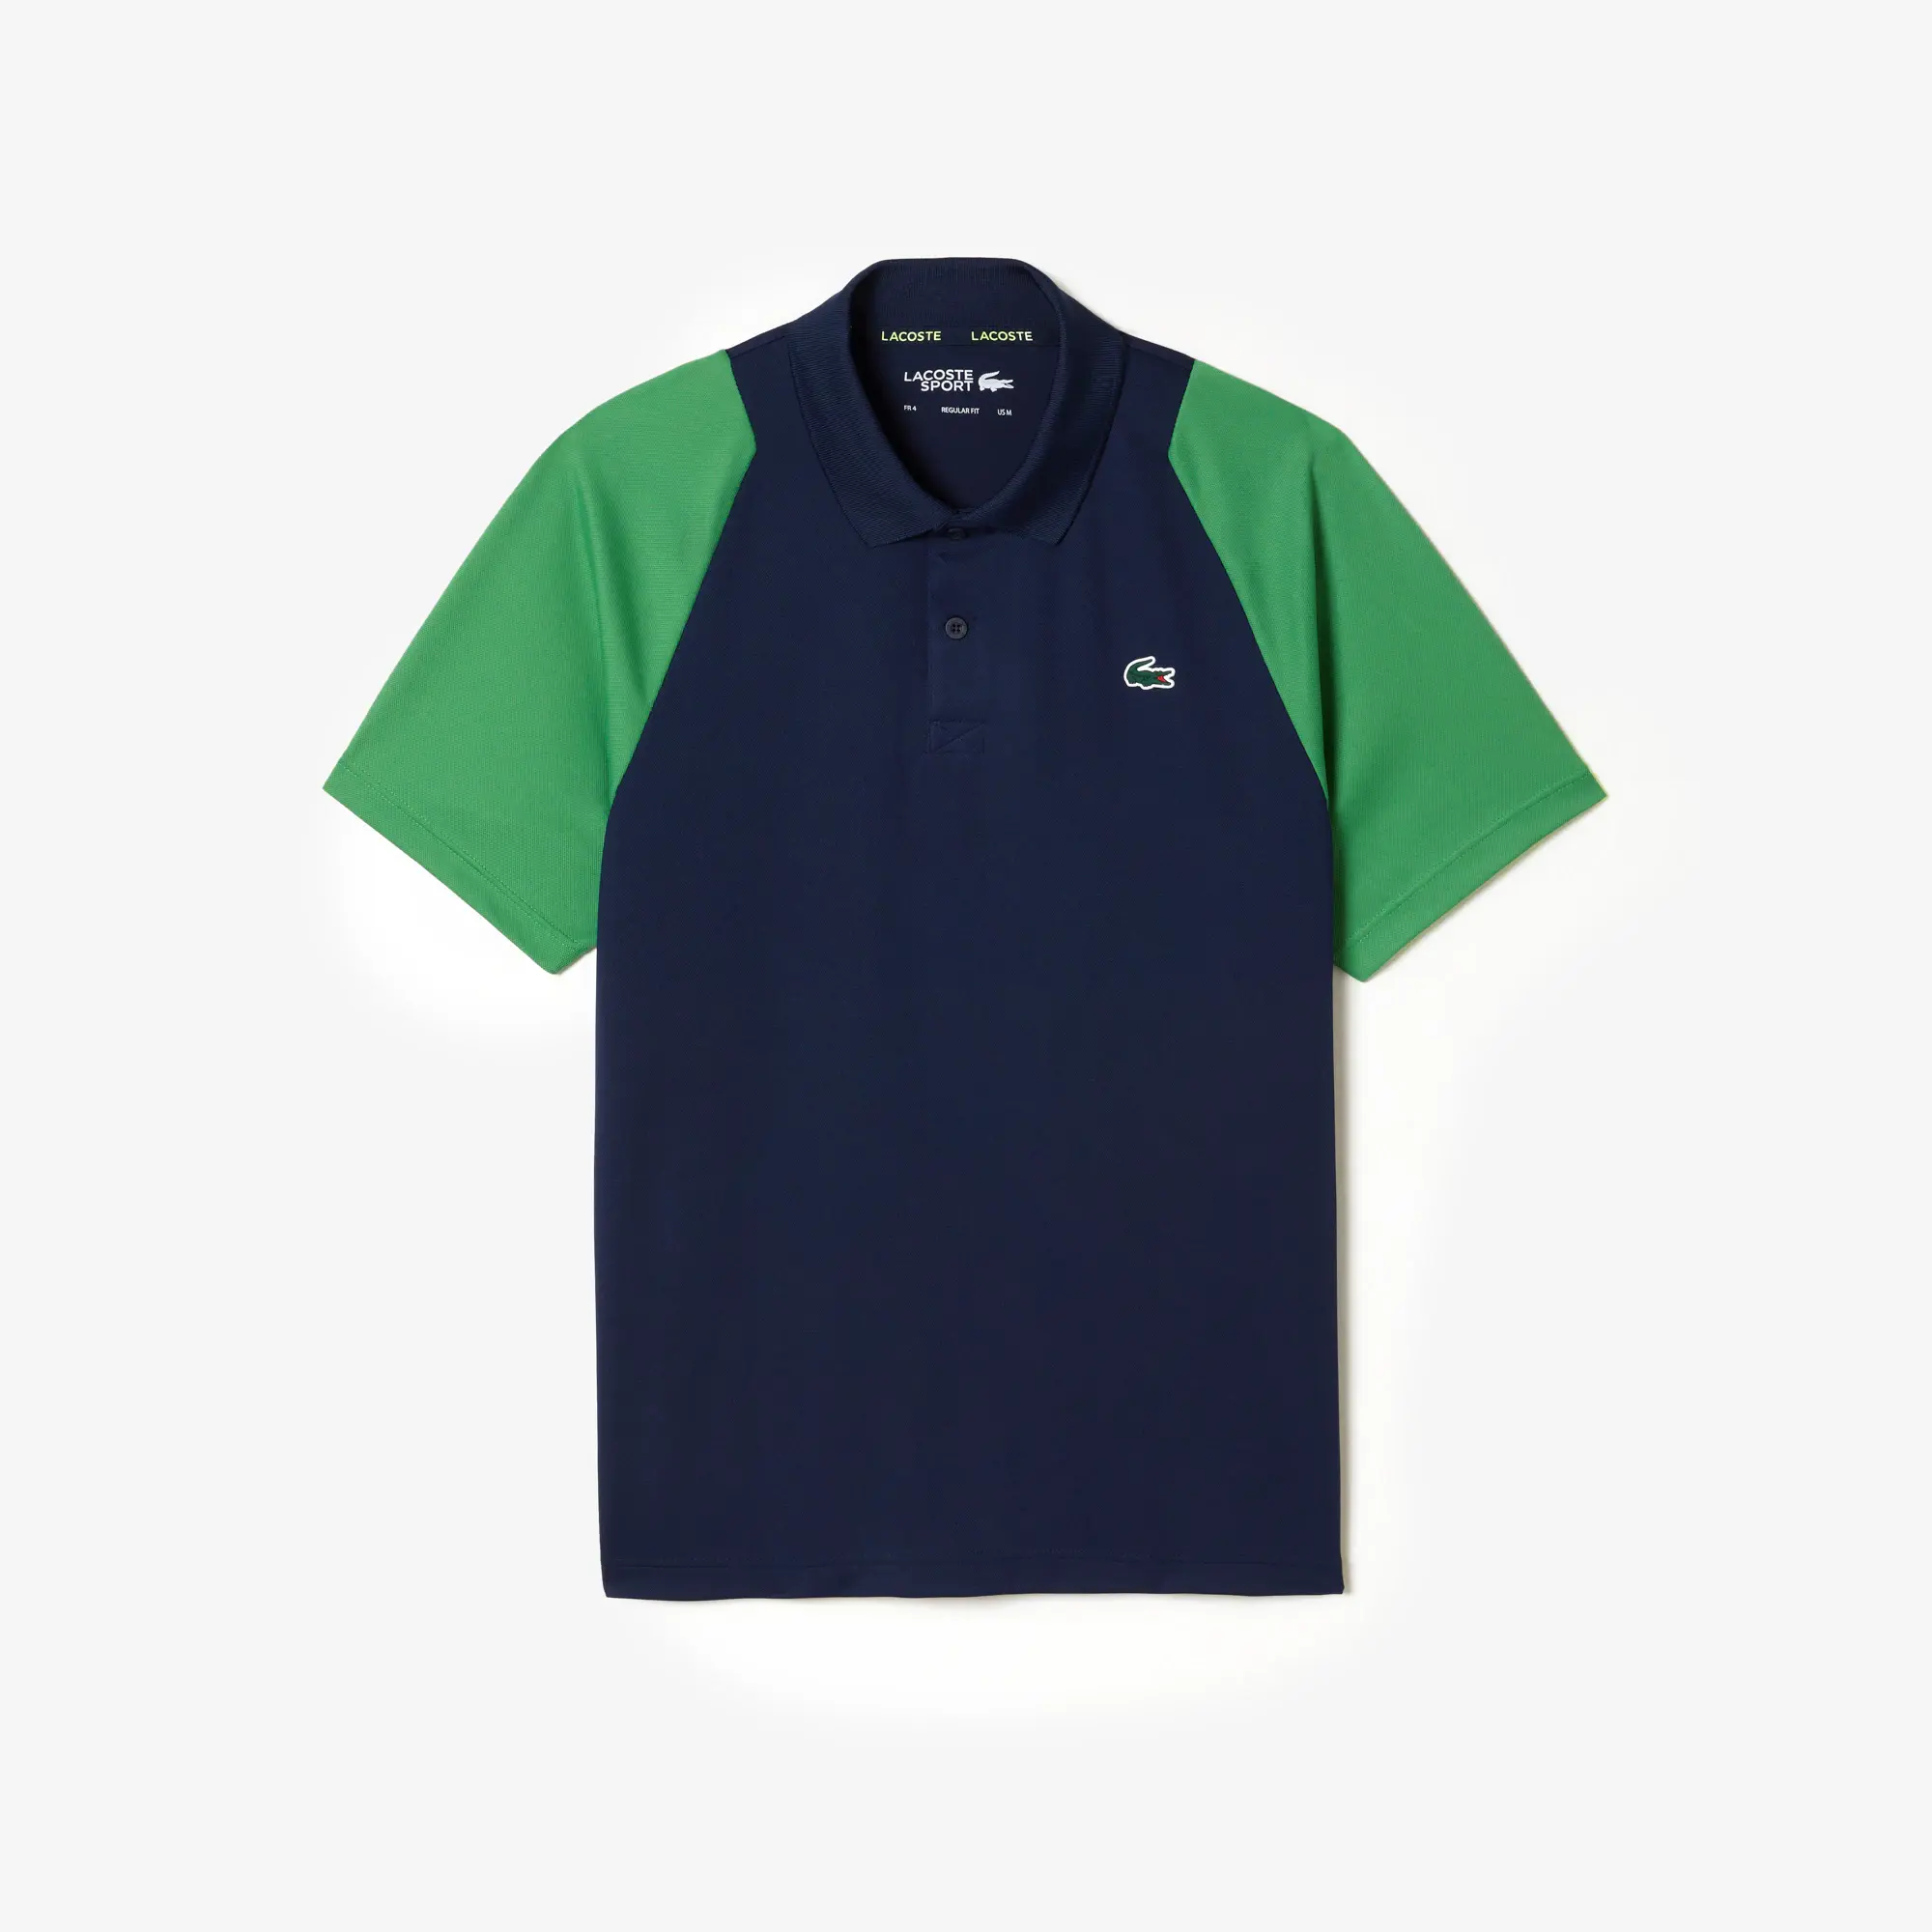 Lacoste Men’s Tennis Recycled Polyester Polo Shirt. 2